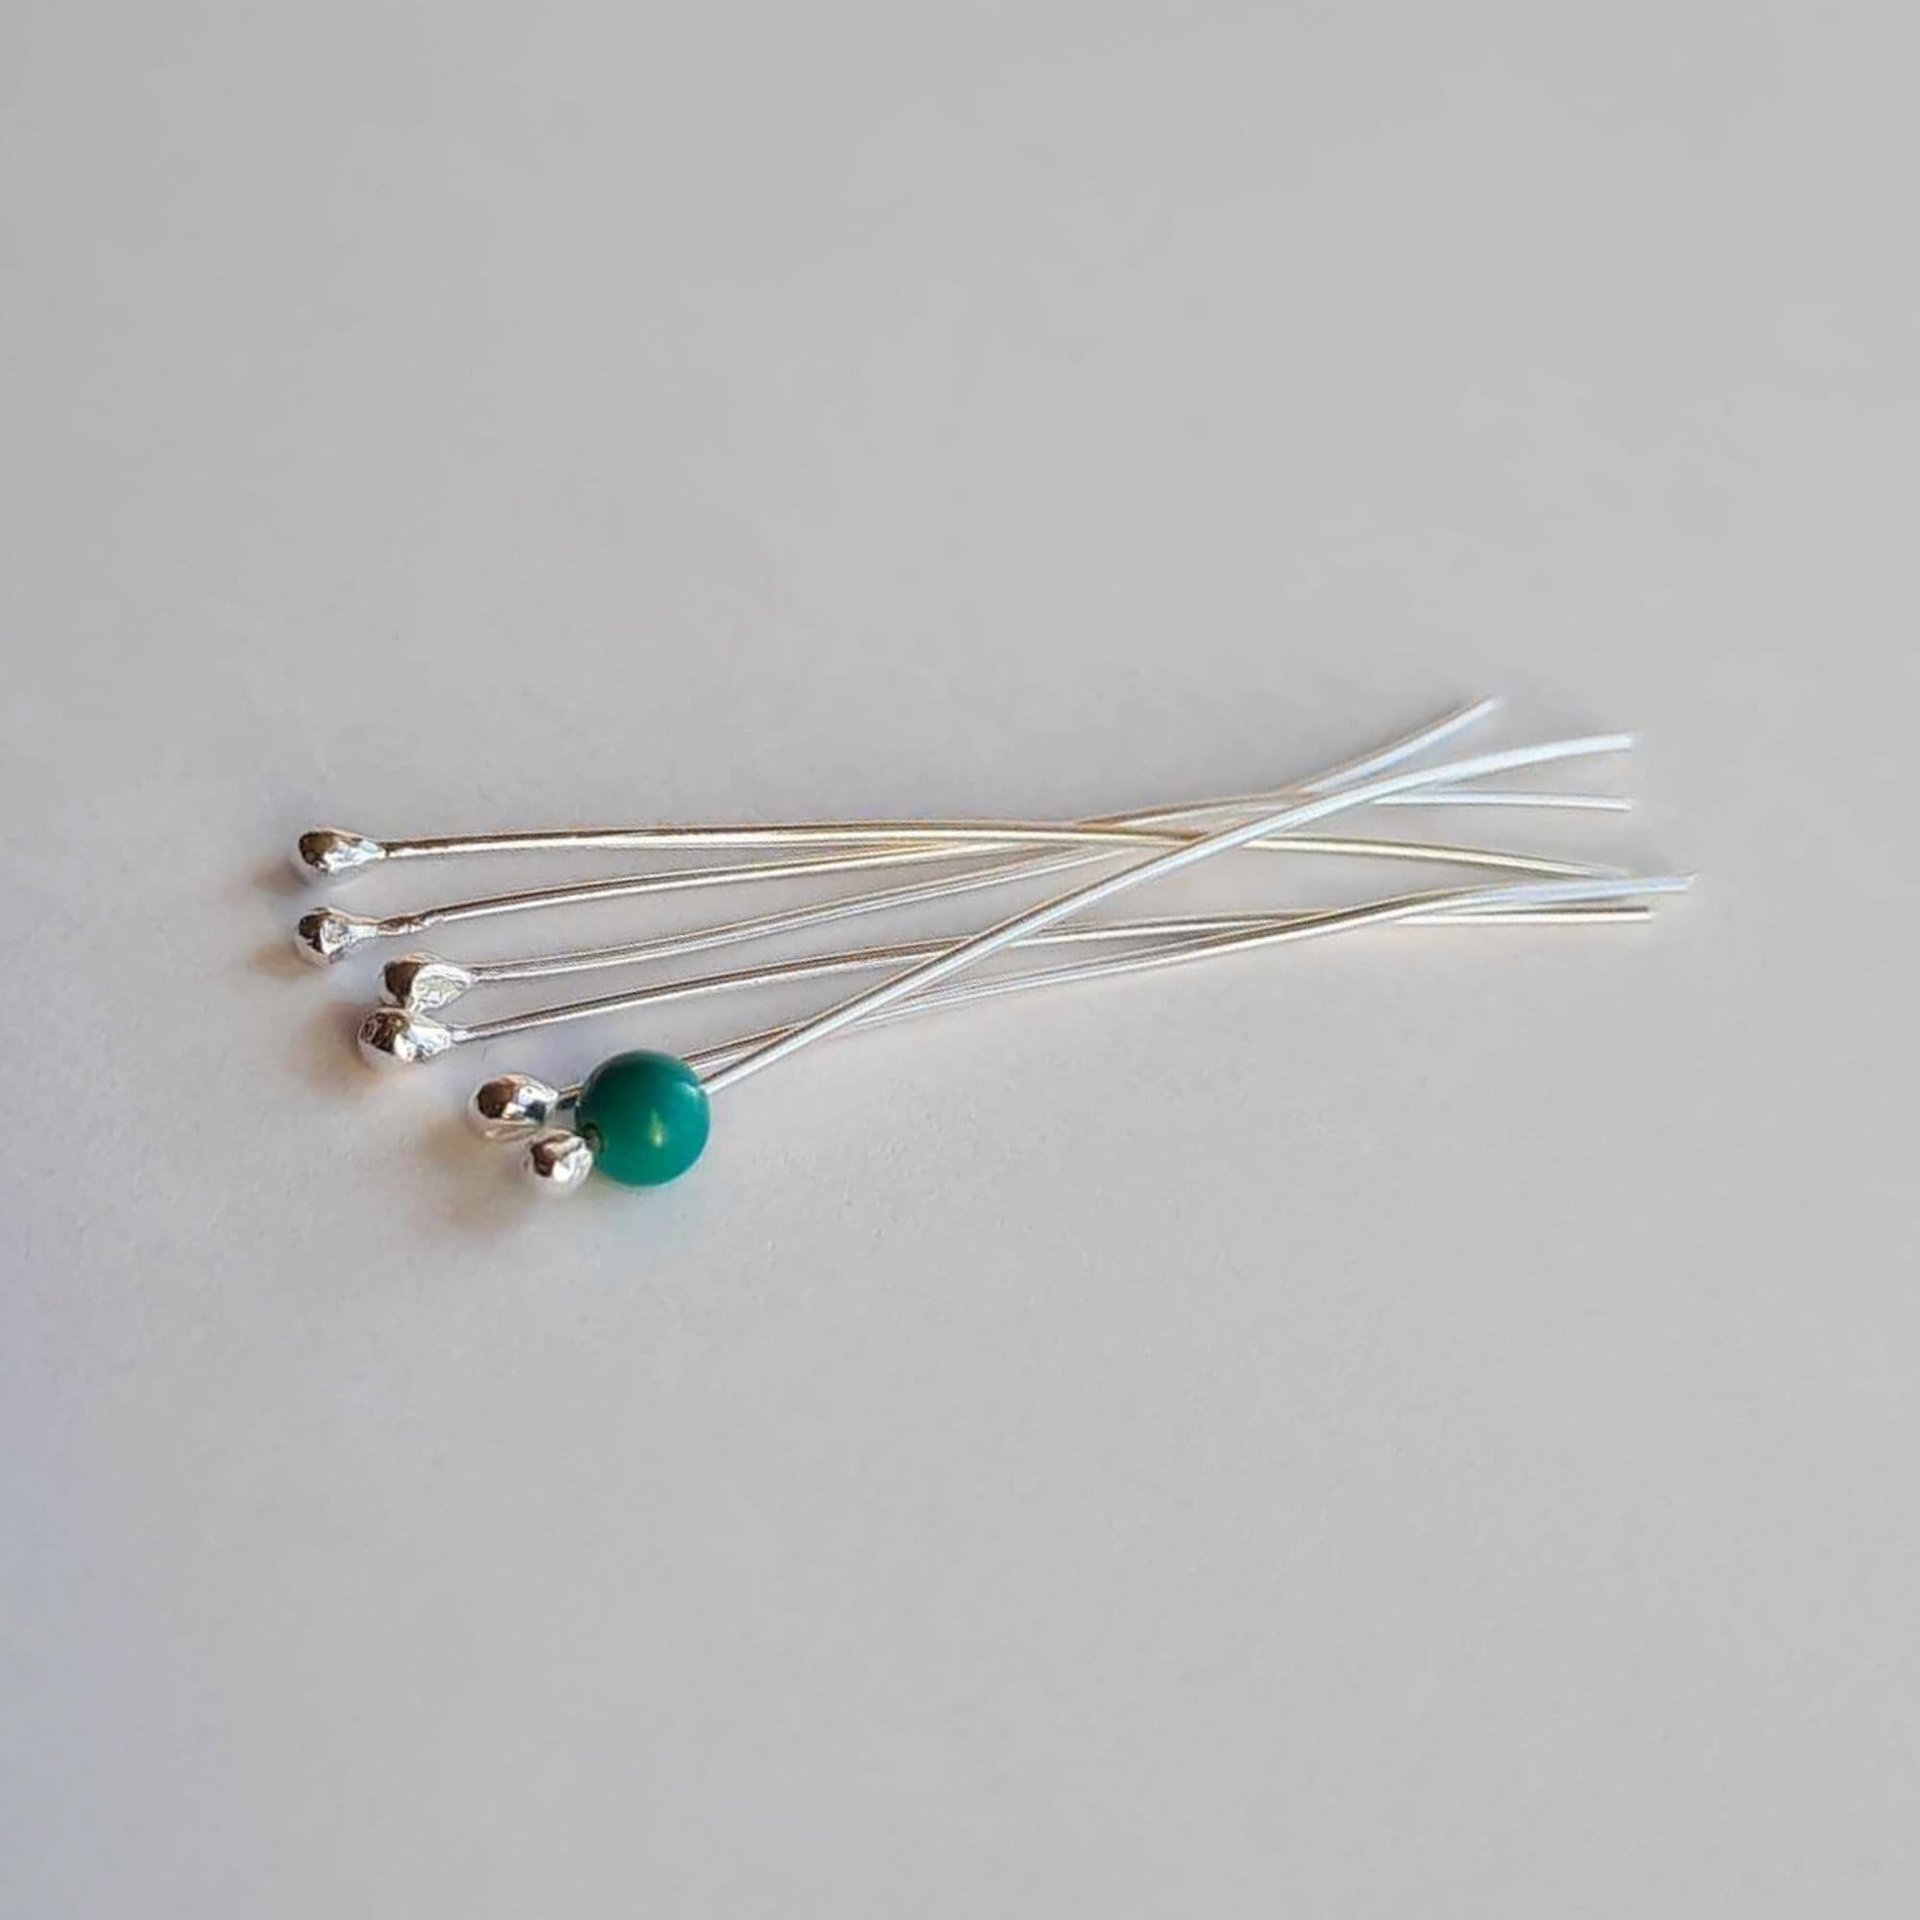 Recycled Sterling Silver Ball Tip Head Pins ~ Handcrafted by The Tiny Tree Frog Jewellery